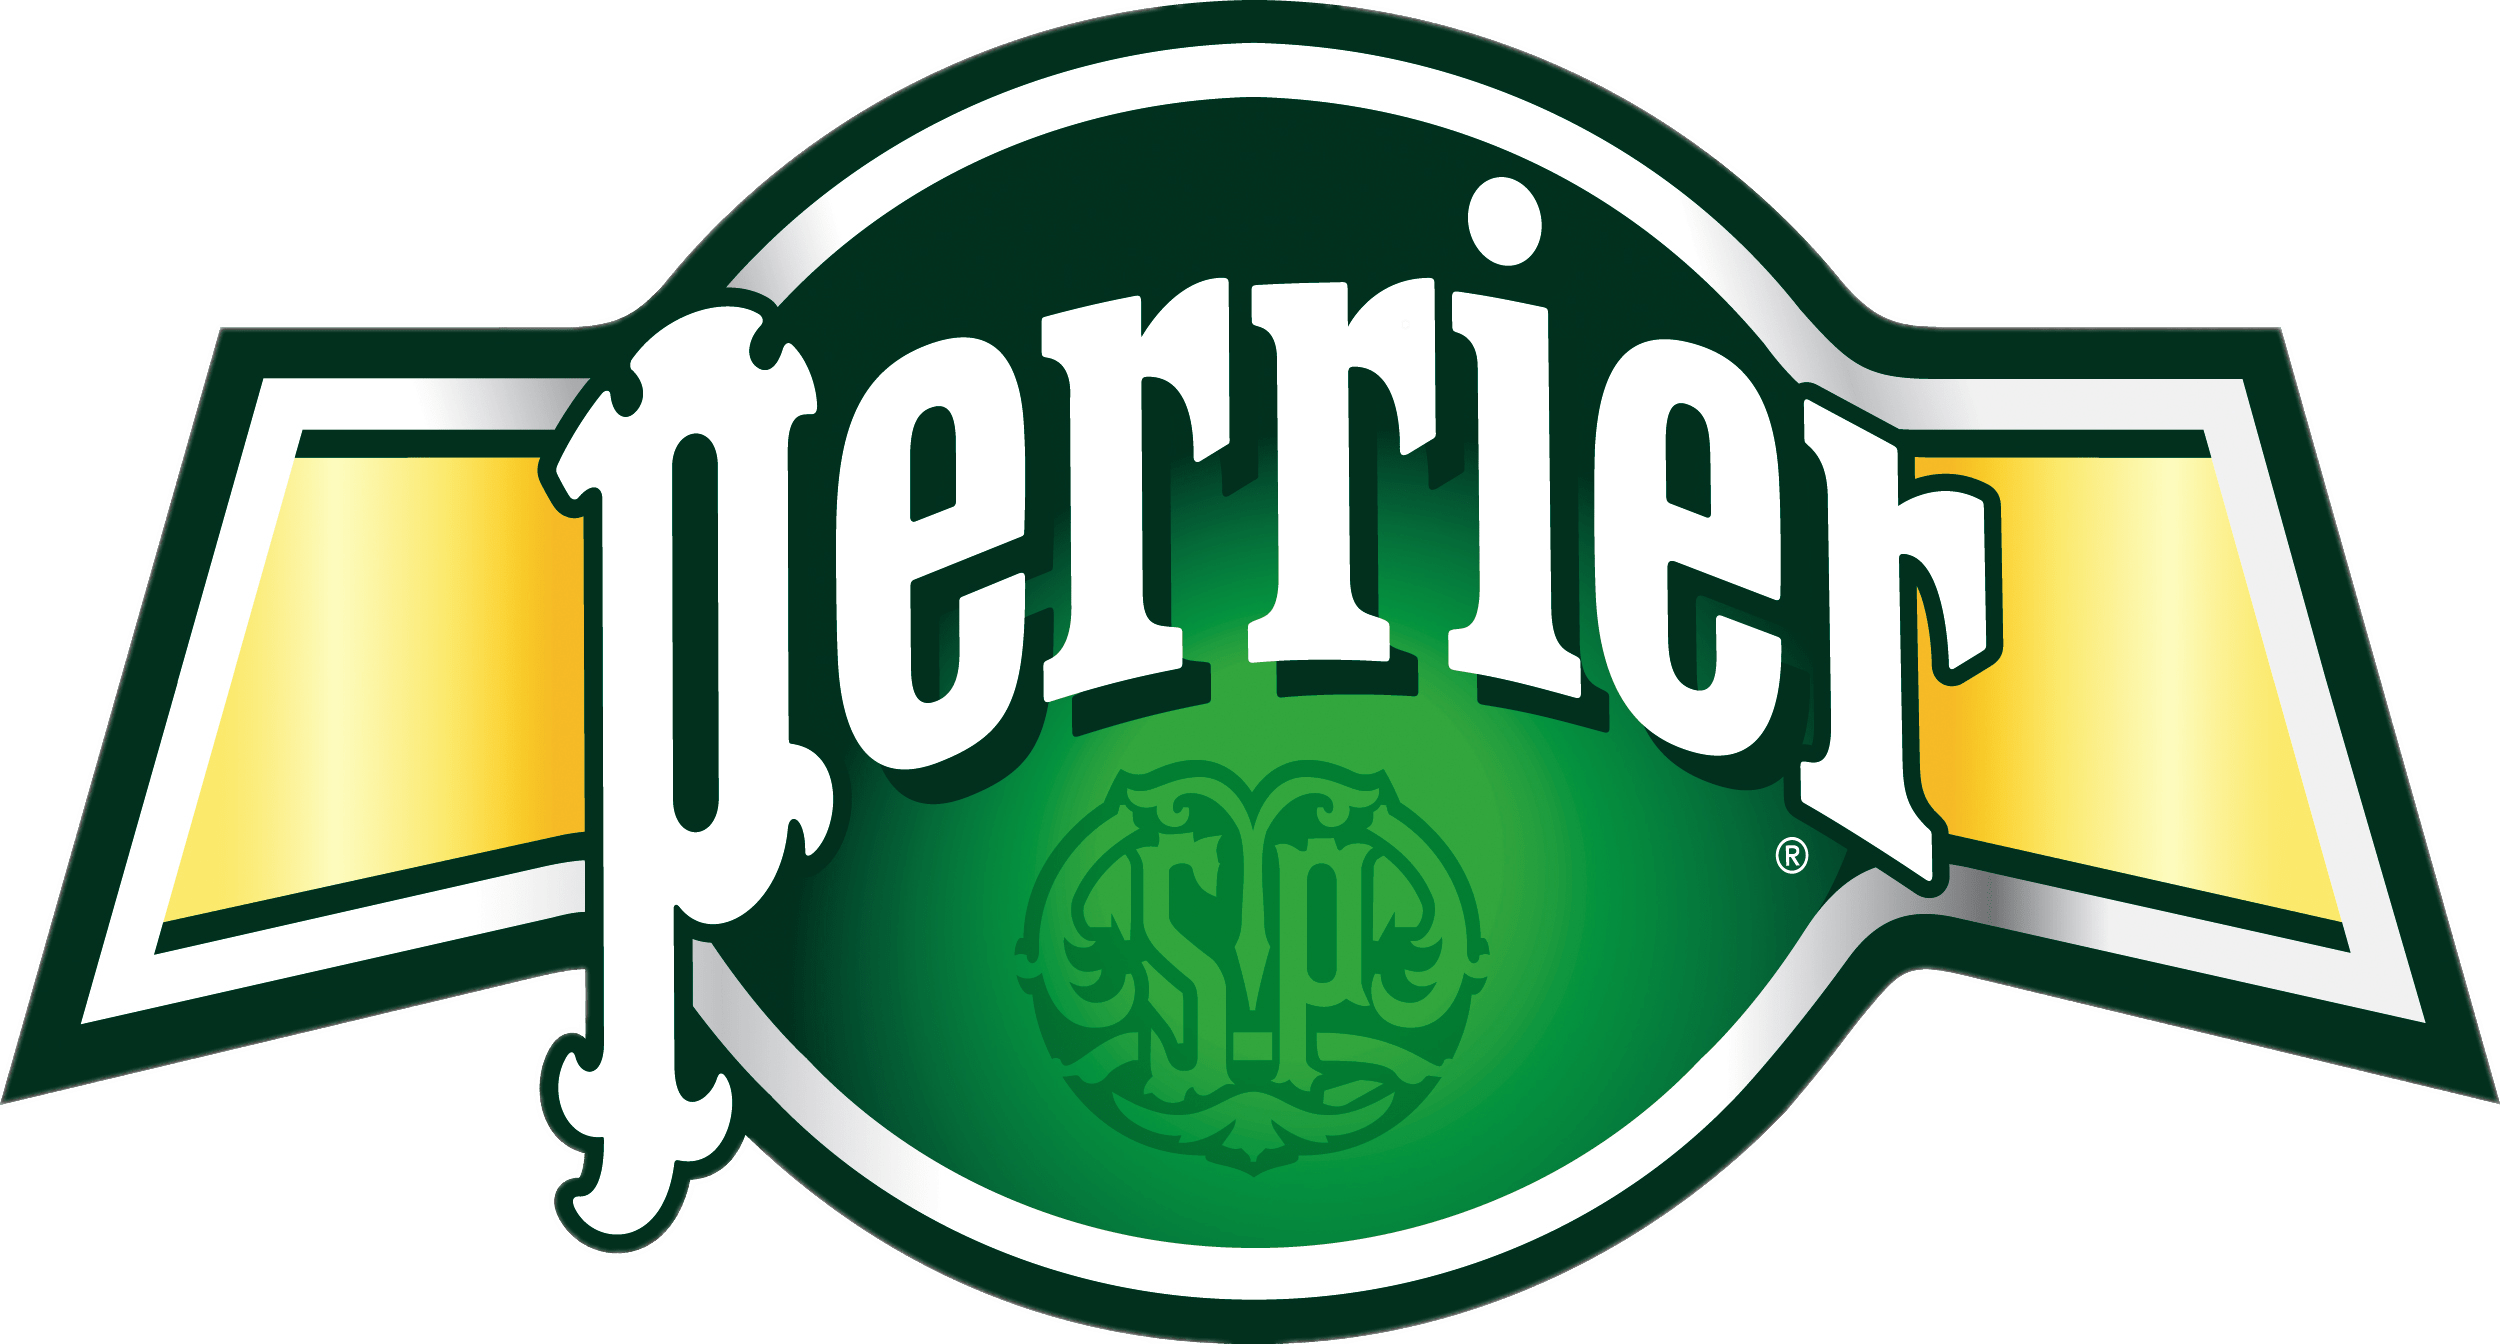 Perrier Logo PNG images